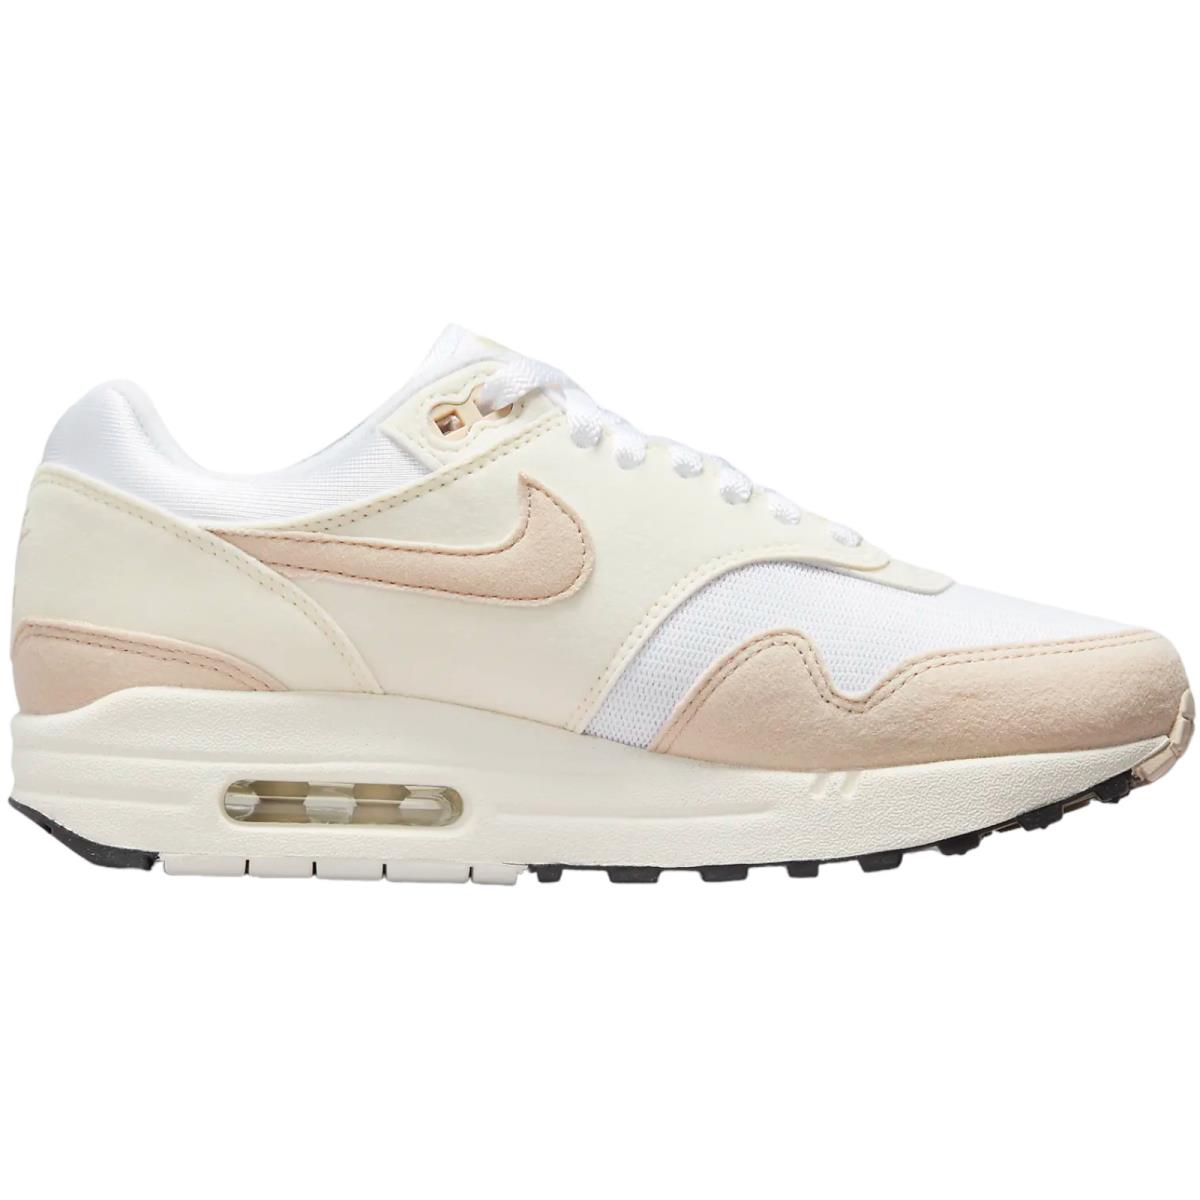 Nike Air Max 1 Women`s Casual Shoes All Colors US Sizes 6-11 Pale Ivory/White/Sail/Sanddrift